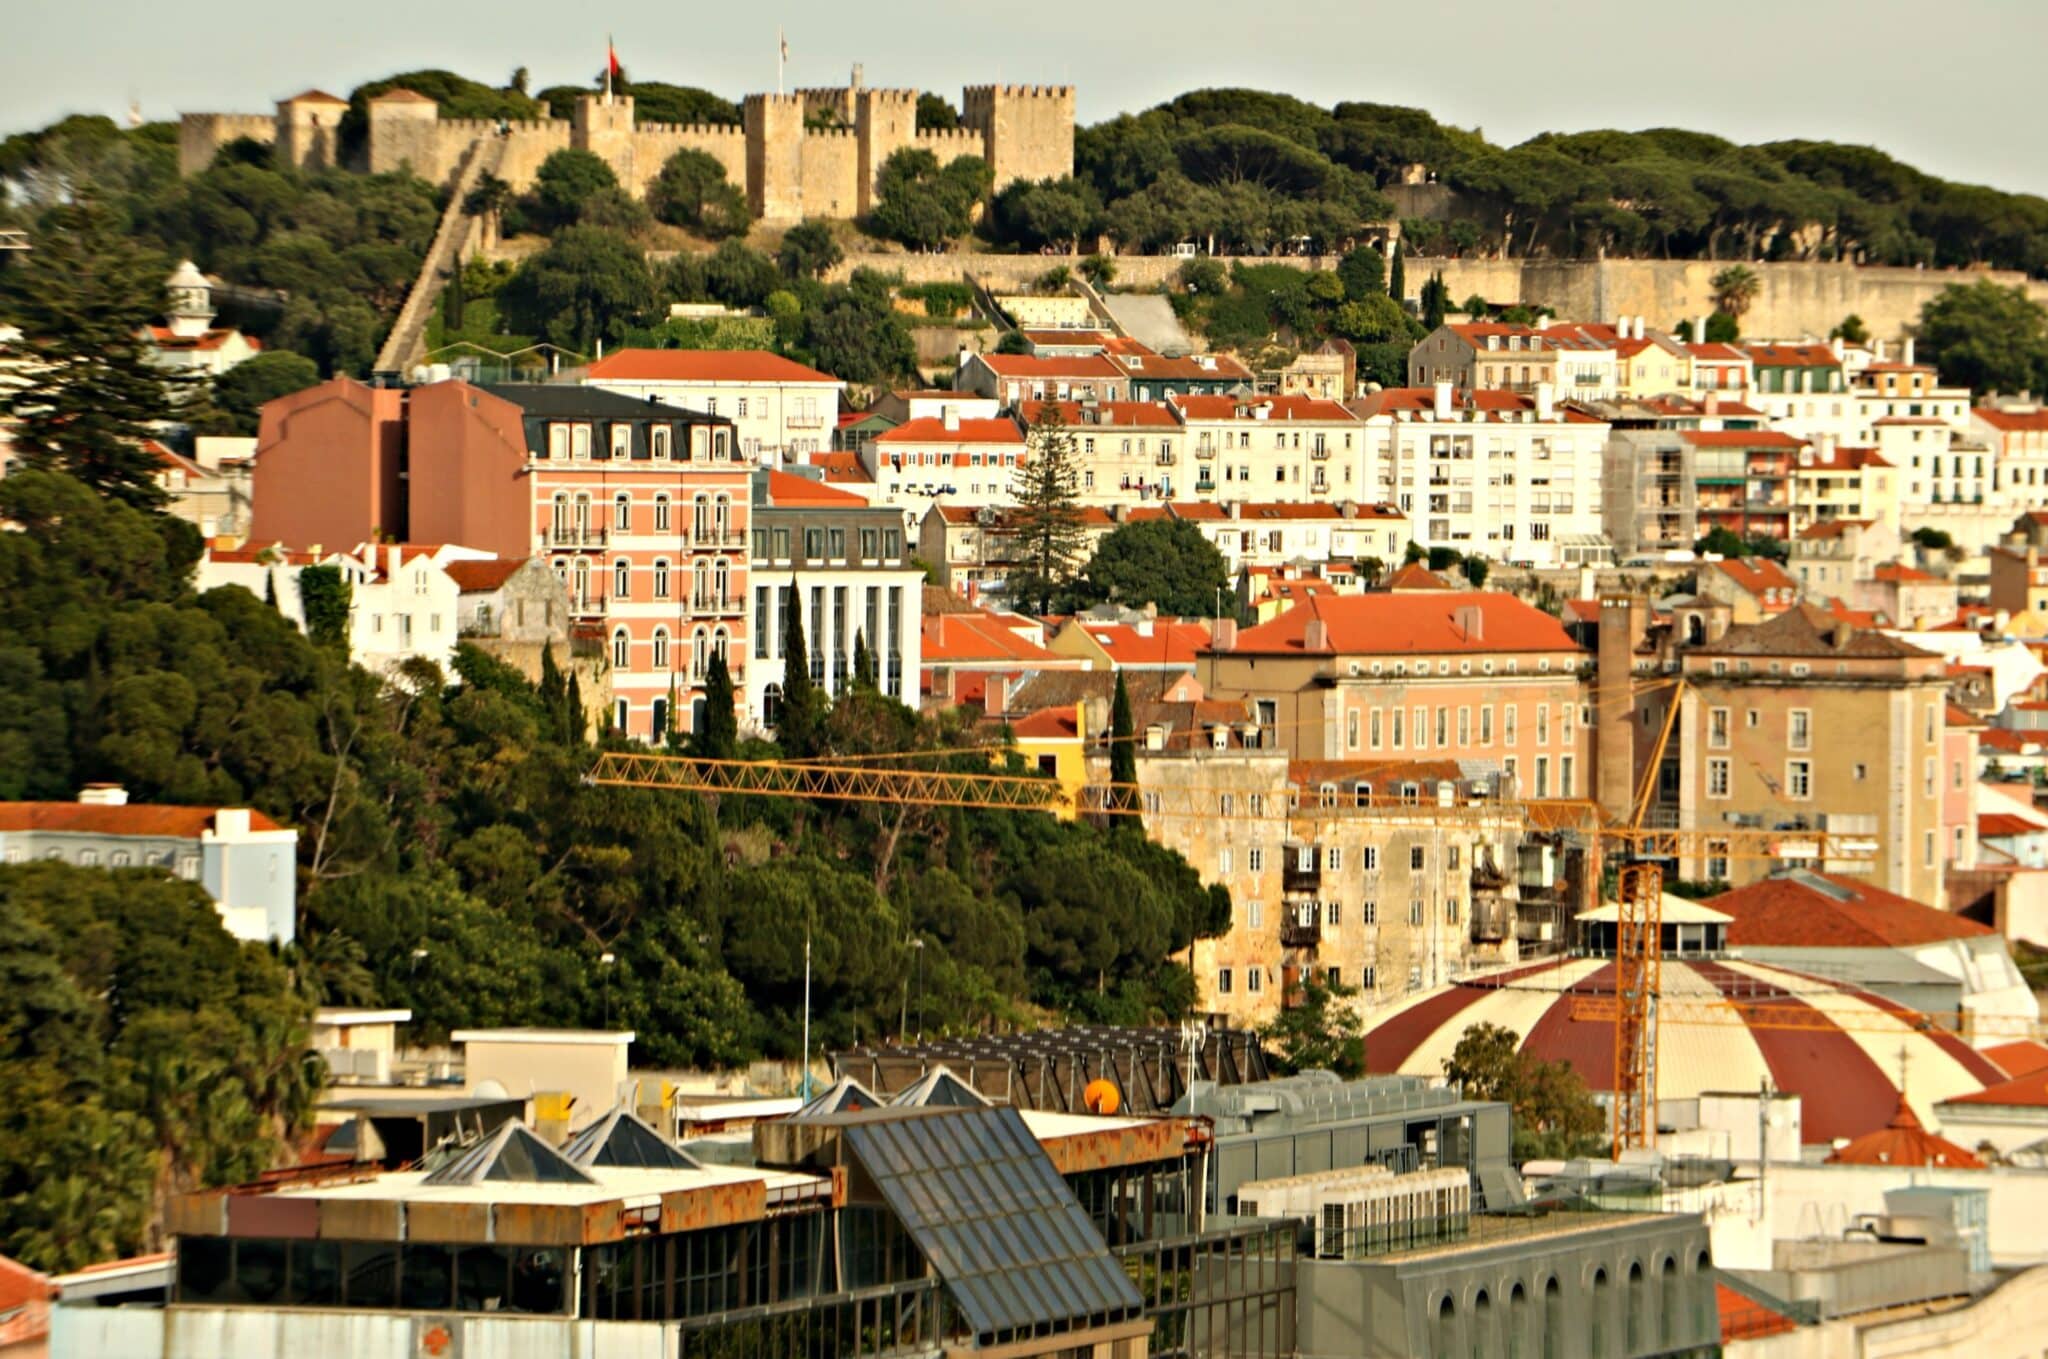 View from Miradouro da Graça, one of the city’s highest lookout points with Sao Jorge Castle (a Moorish fort) in the background